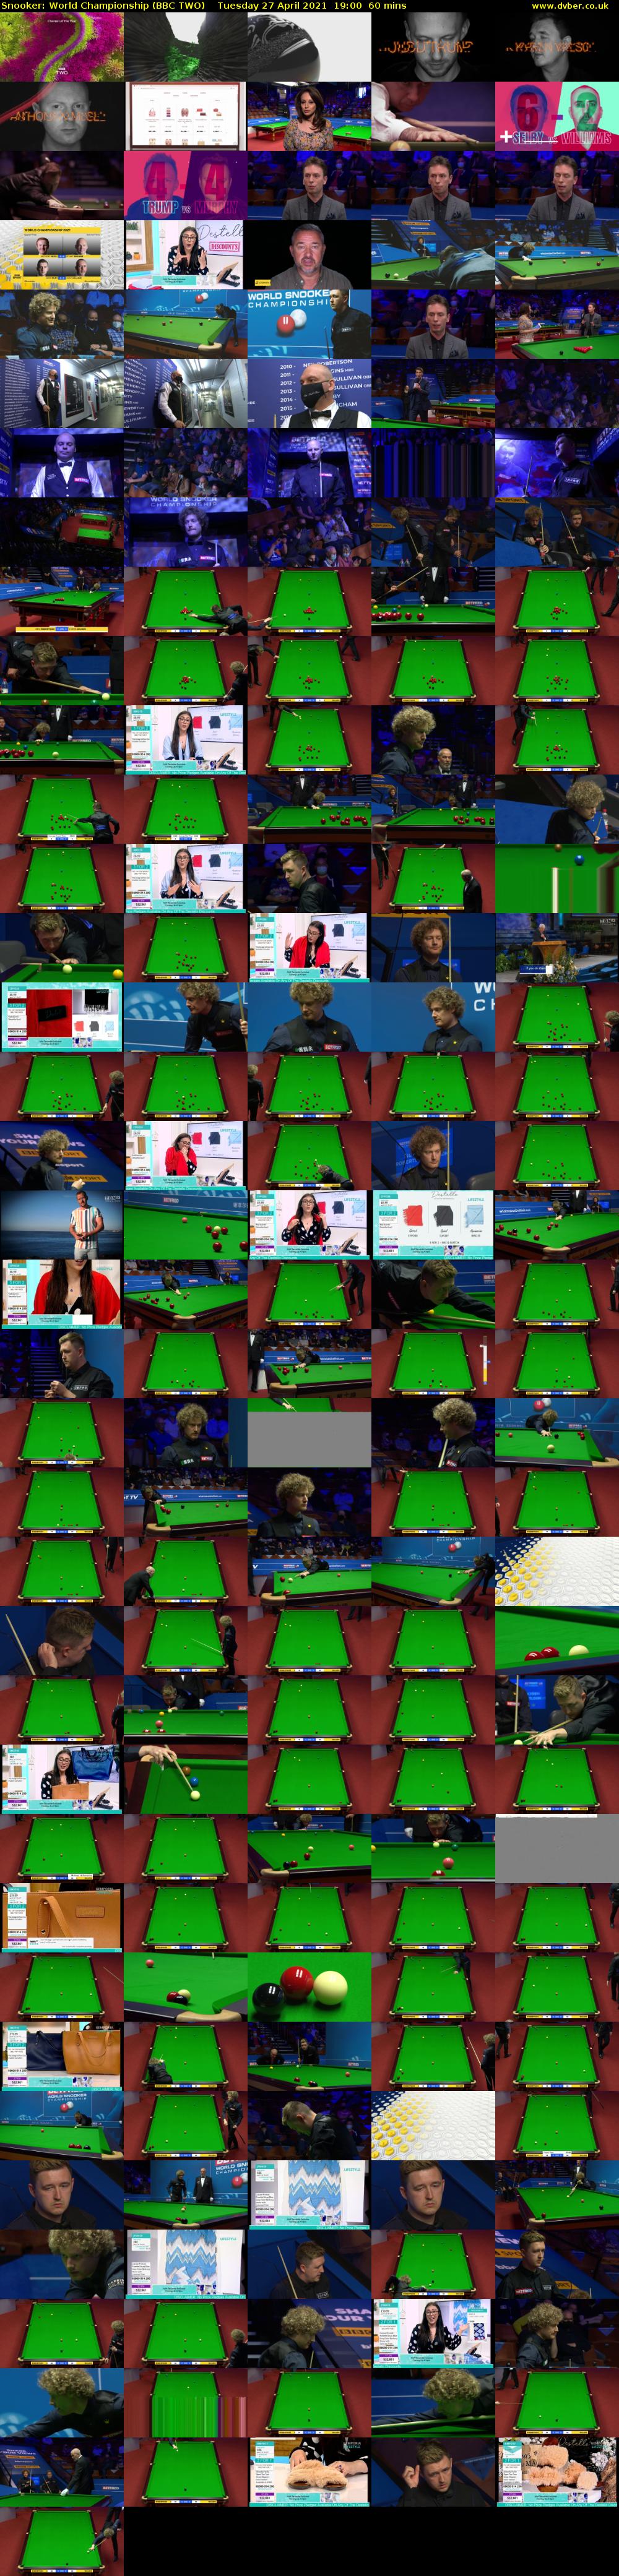 Snooker: World Championship (BBC TWO) Tuesday 27 April 2021 19:00 - 20:00